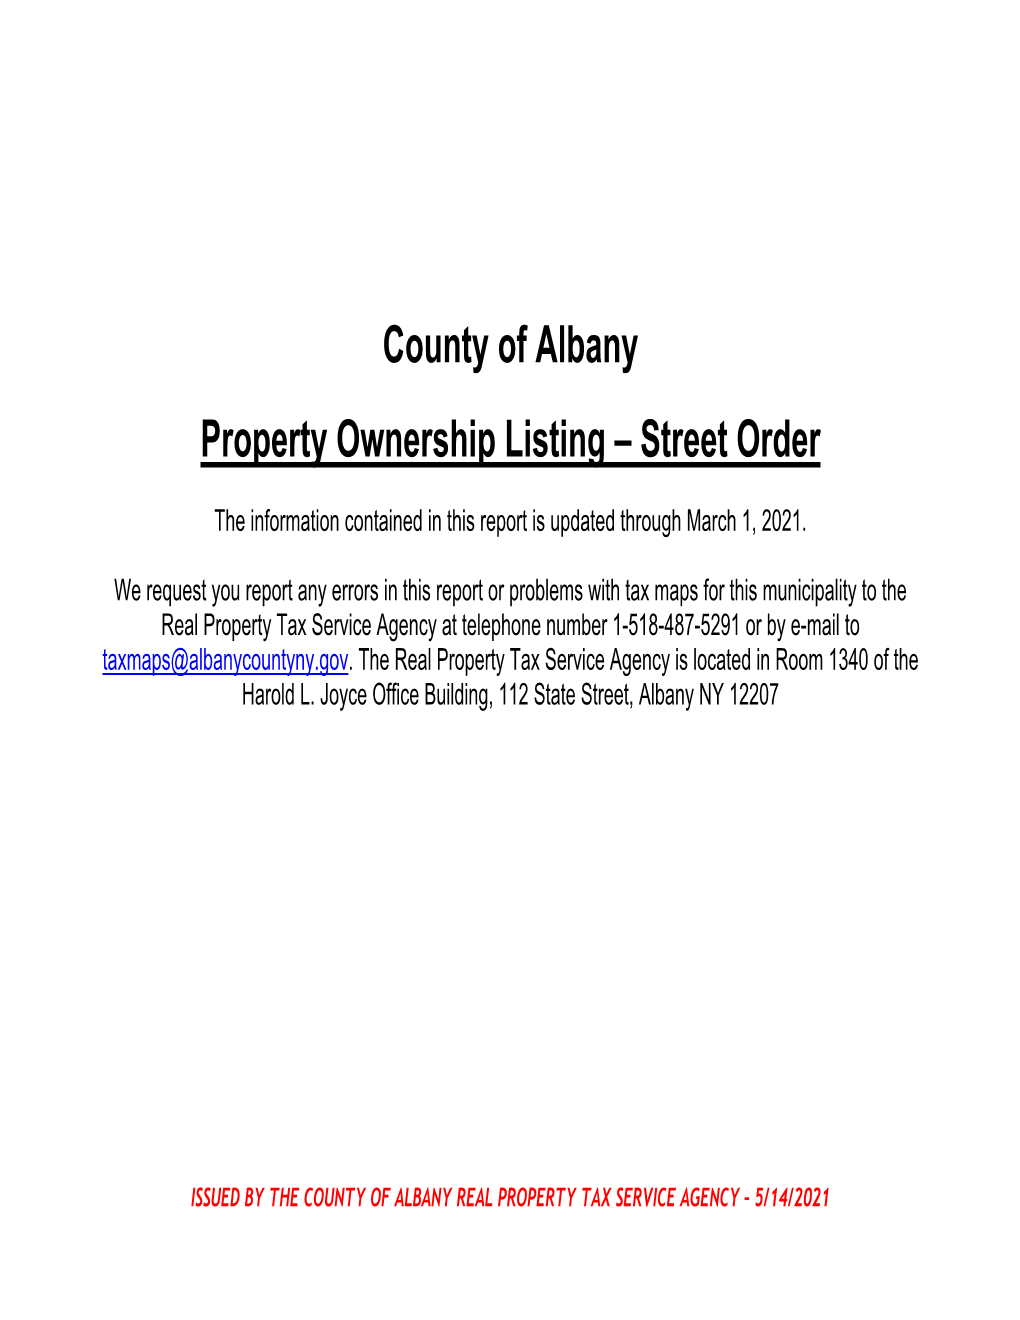 County of Albany Property Ownership Listing – Street Order